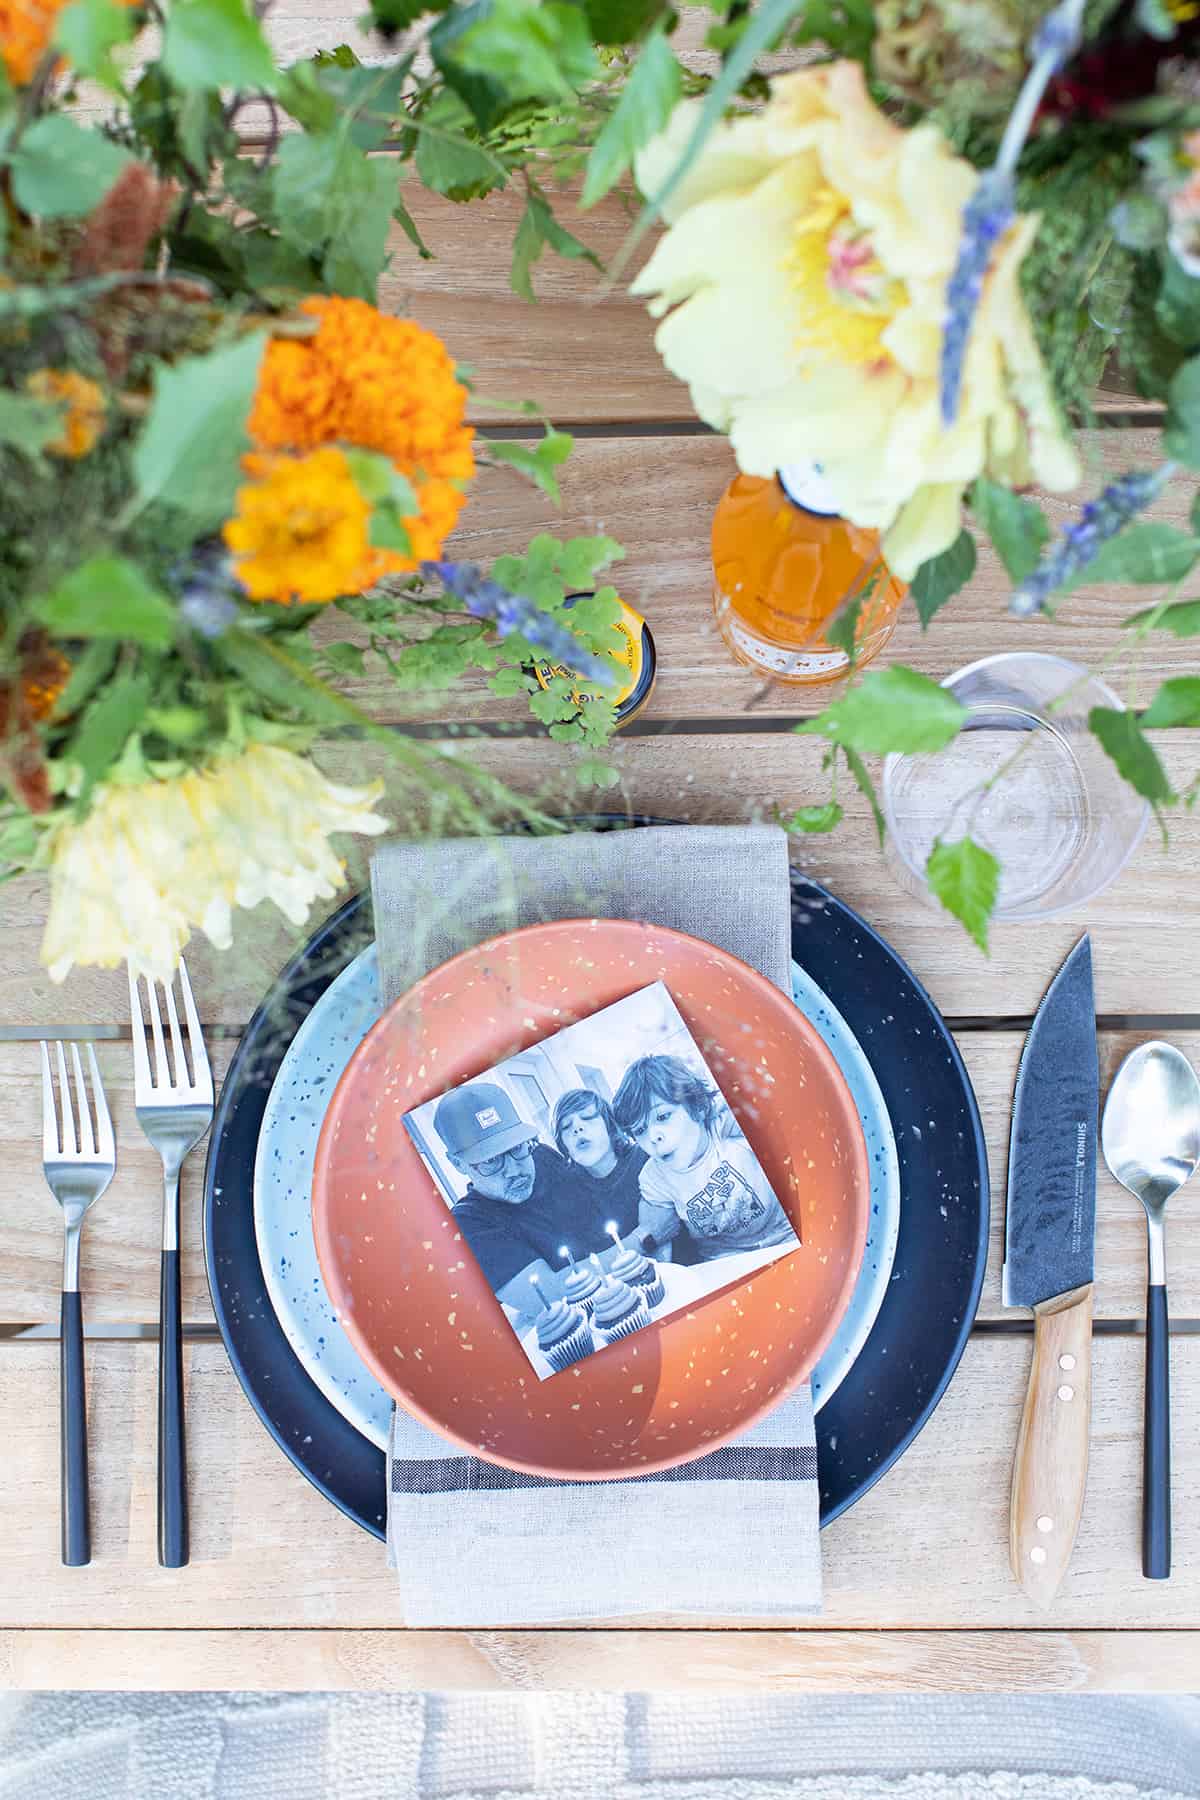 Ideas for a Father's Day table setting